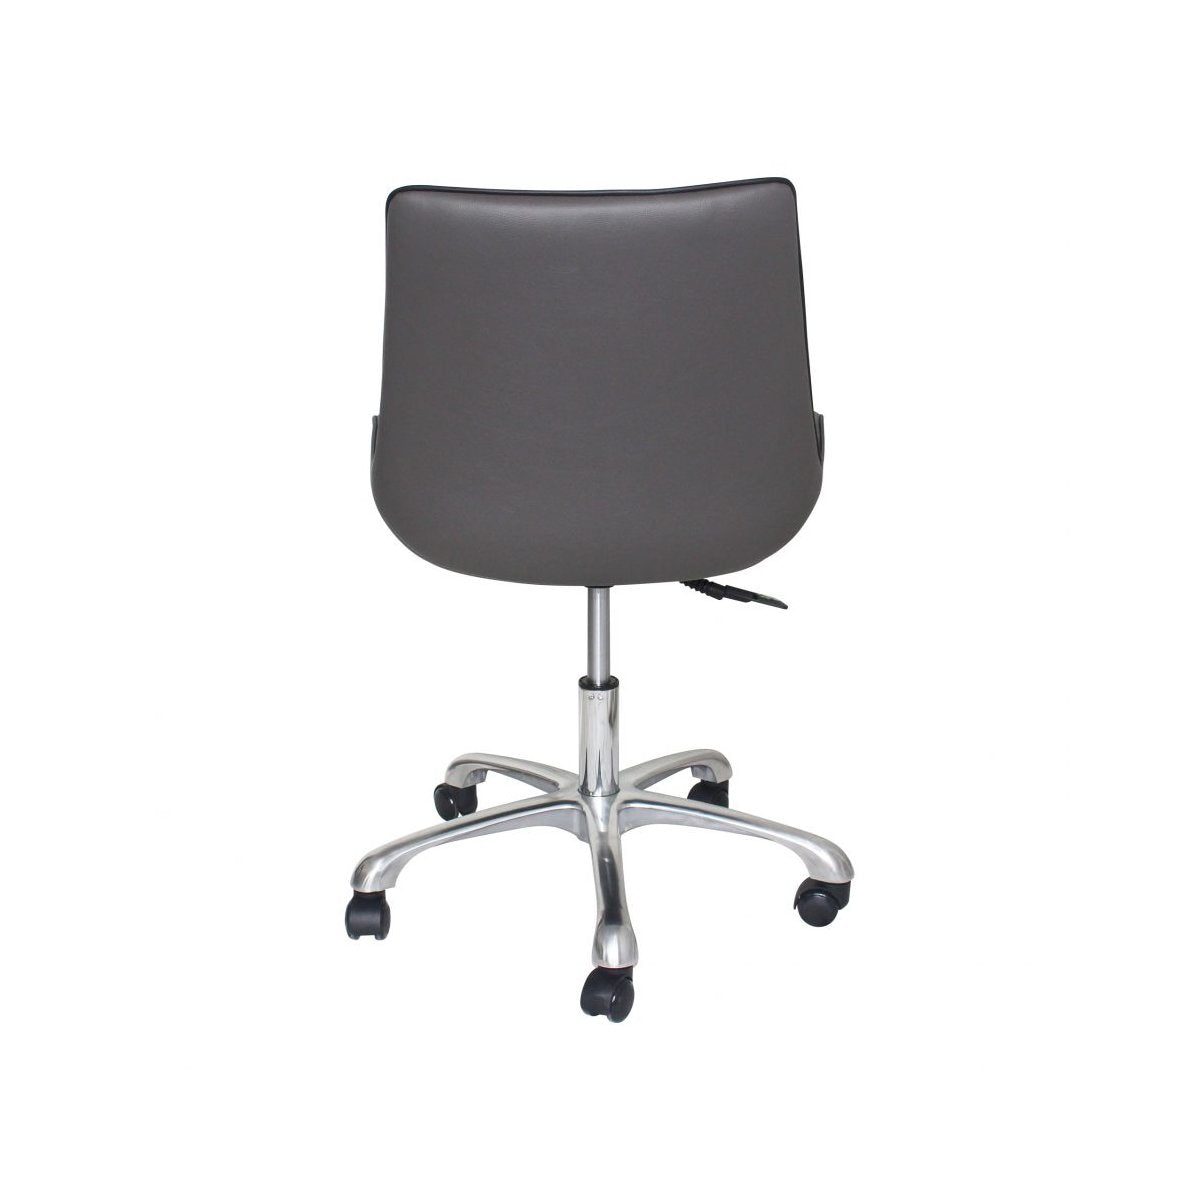 Load image into Gallery viewer, Mack Swivel Office Chair Grey Office Chairs Moe&amp;#39;s     Four Hands, Burke Decor, Mid Century Modern Furniture, Old Bones Furniture Company, Old Bones Co, Modern Mid Century, Designer Furniture, https://www.oldbonesco.com/
